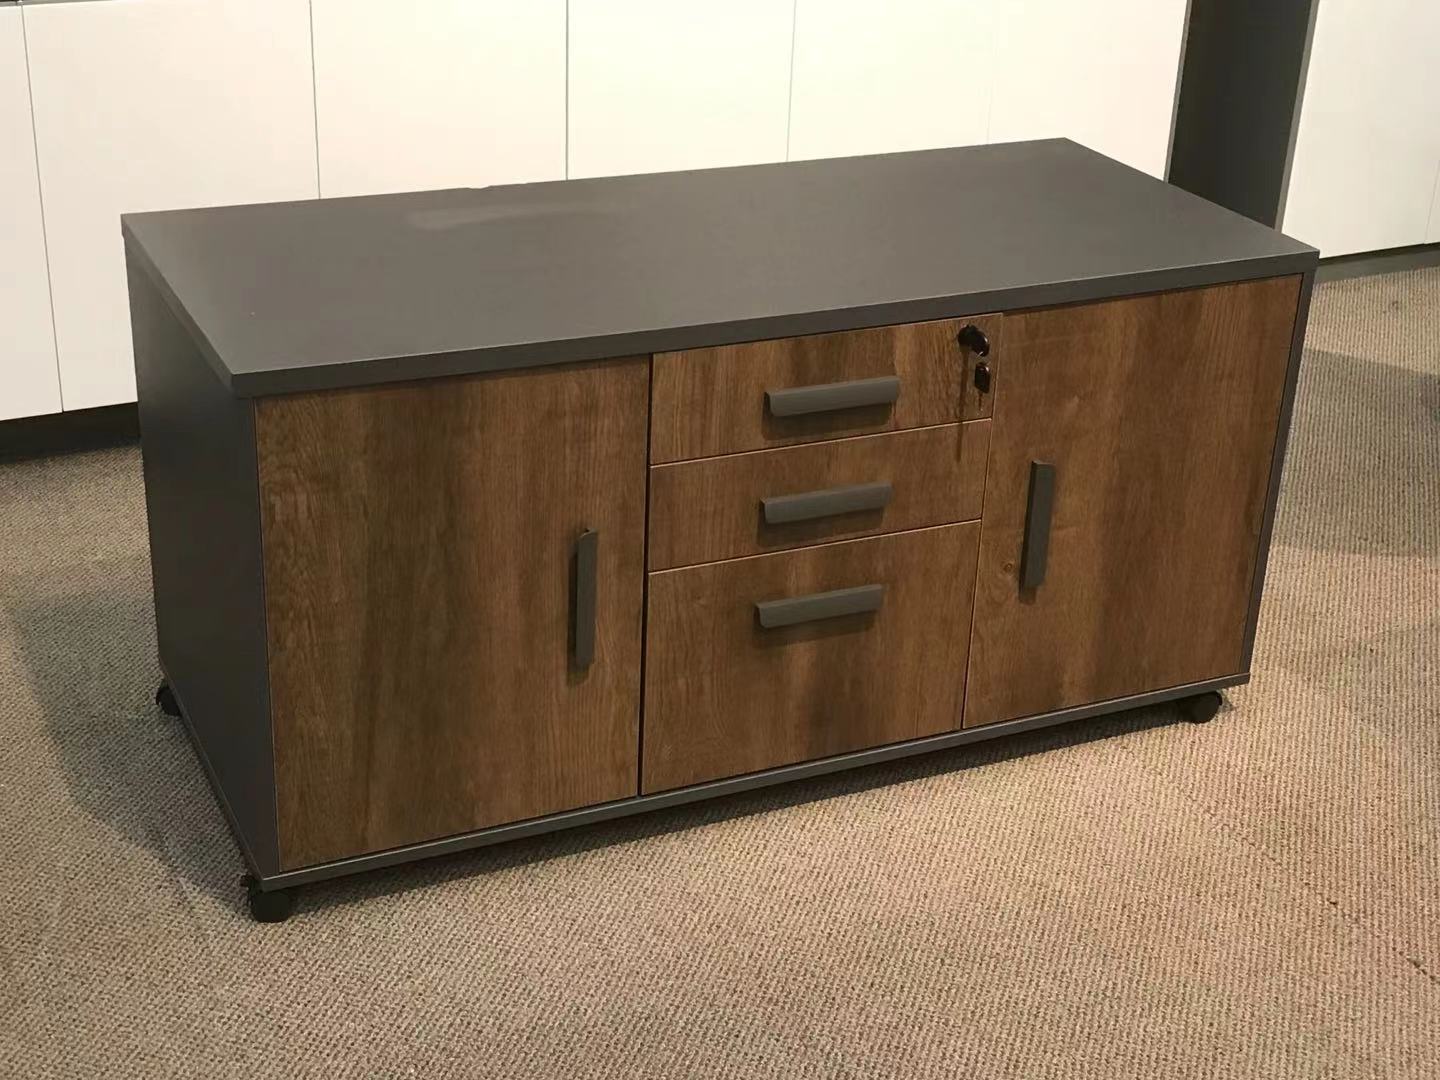 Movable Cabinet